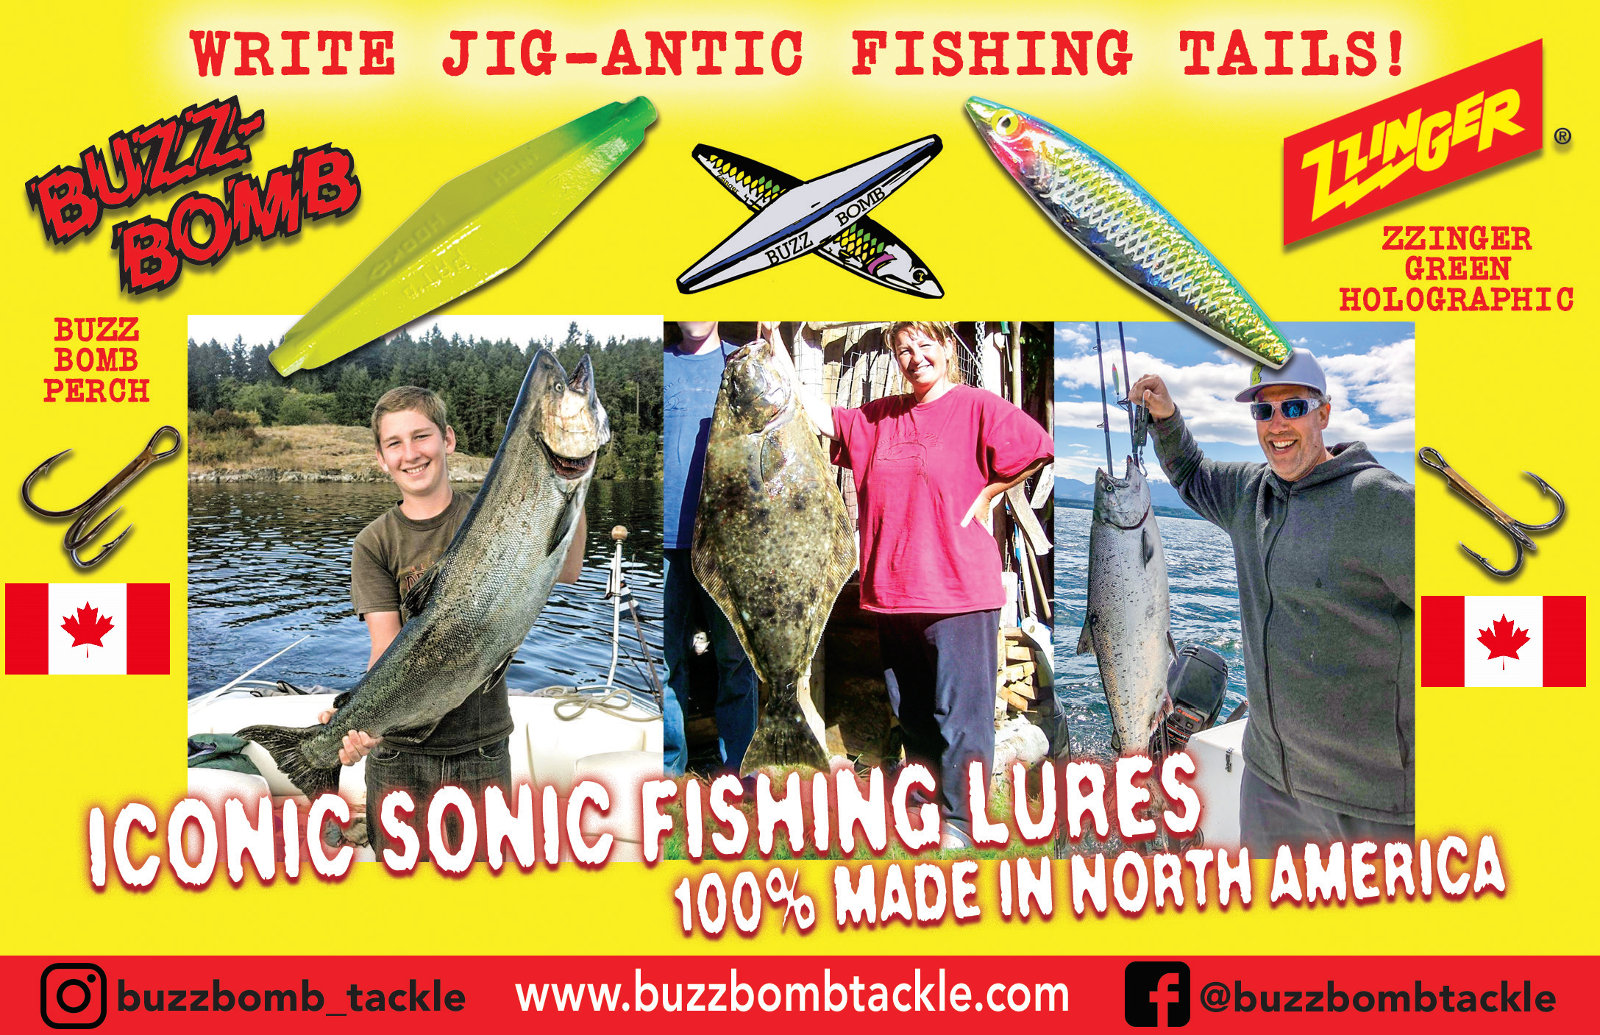 Where to Buy Buzz Bomb lures, Zzinger lures, Spinnow Lure, Zelda Jigs